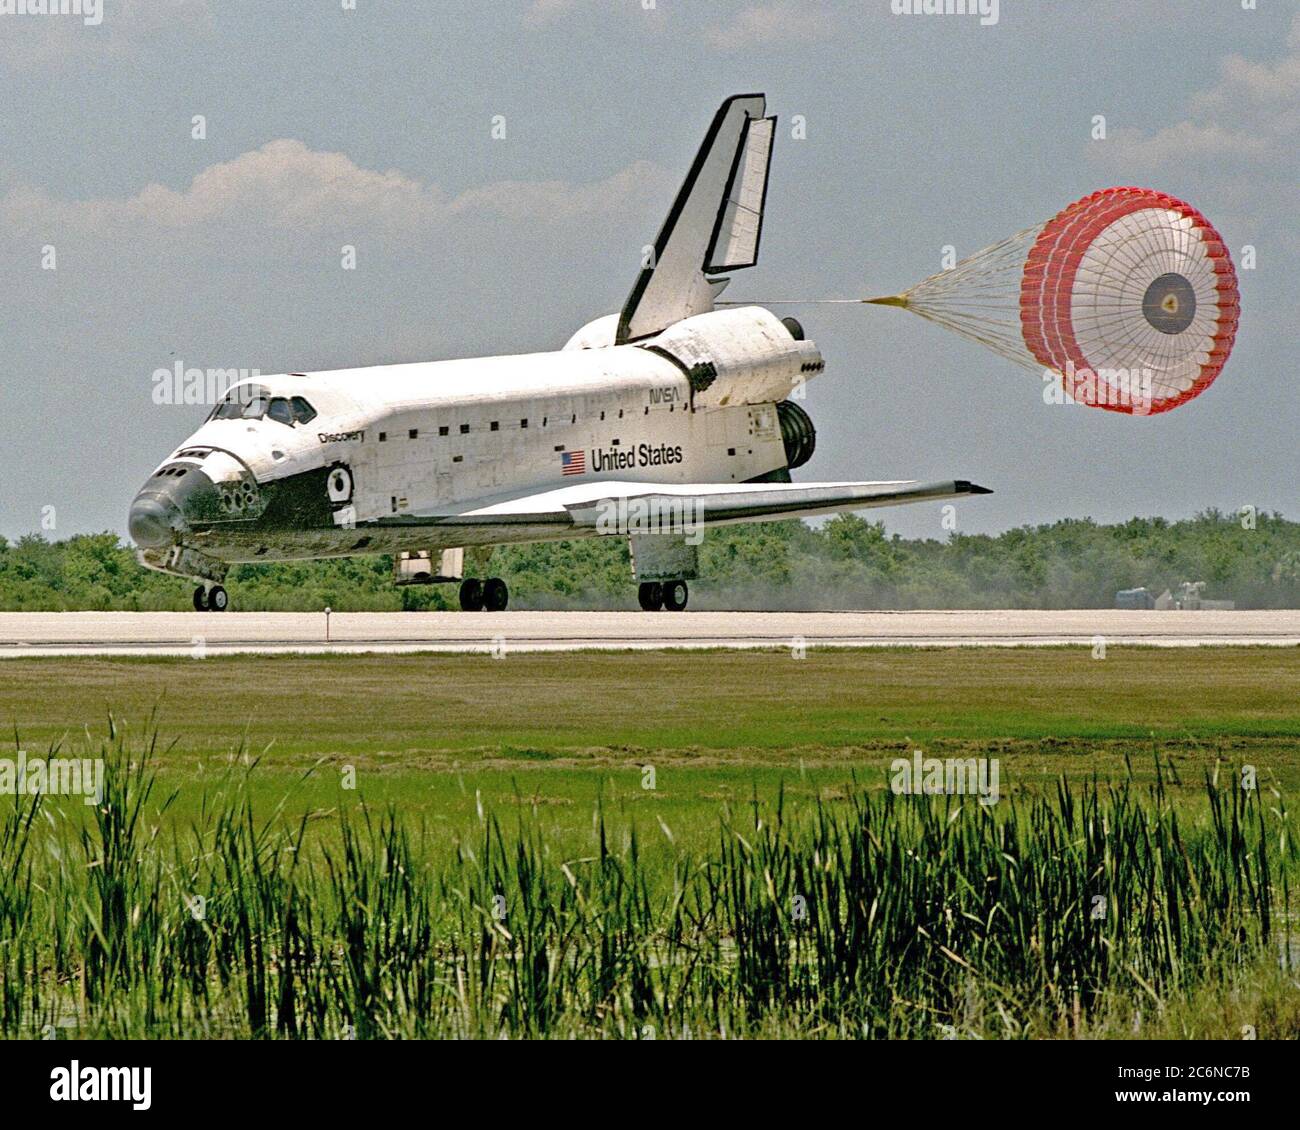 With its drag chute deployed, the orbiter Discovery touches down on Runway 15 of KSC's Shuttle Landing Facility to complete the STS-91 mission. Main gear touchdown was at 2:00:18 p.m. EDT on June 12, 1998, landing on orbit 155 of the mission. The wheels stopped at 2:01:22 p.m. EDT, for a total mission-elapsed time of 9 days, 19 hours, 55 minutes and 1 second. Stock Photo